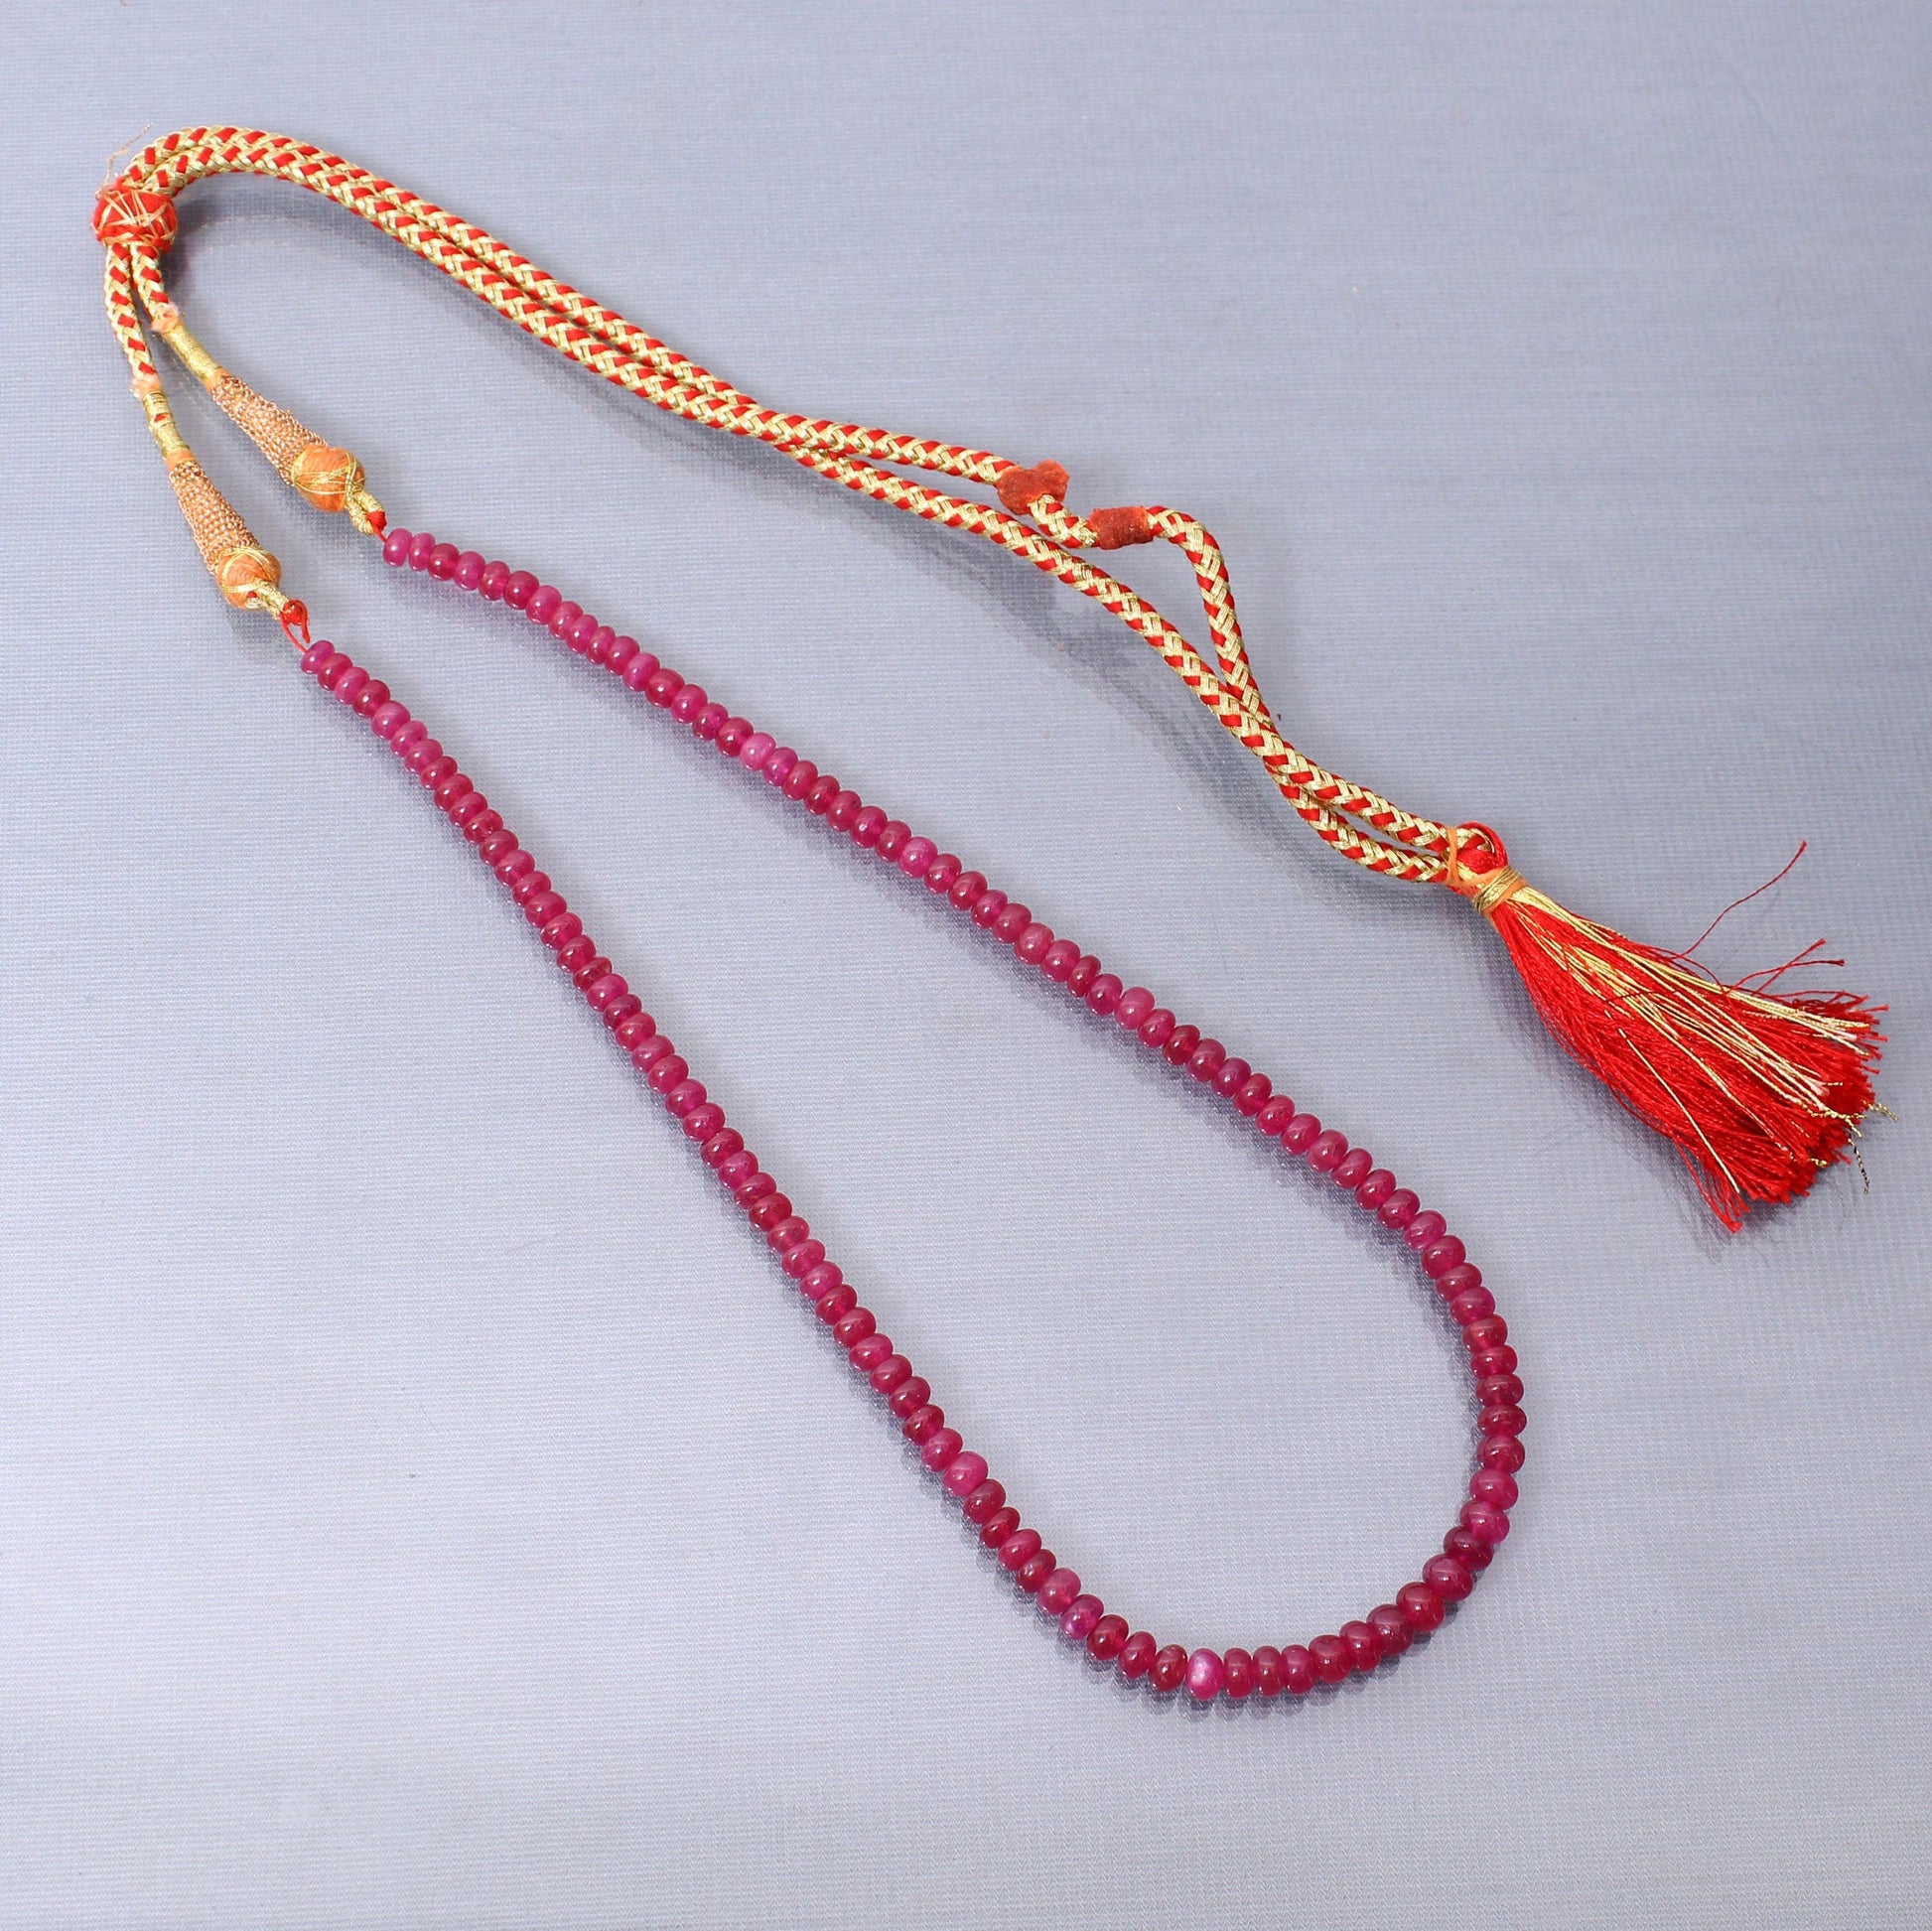 Natural Ruby Sarafa Necklace For Women Made With Rondelle Smooth High Quality Beads GemsRush